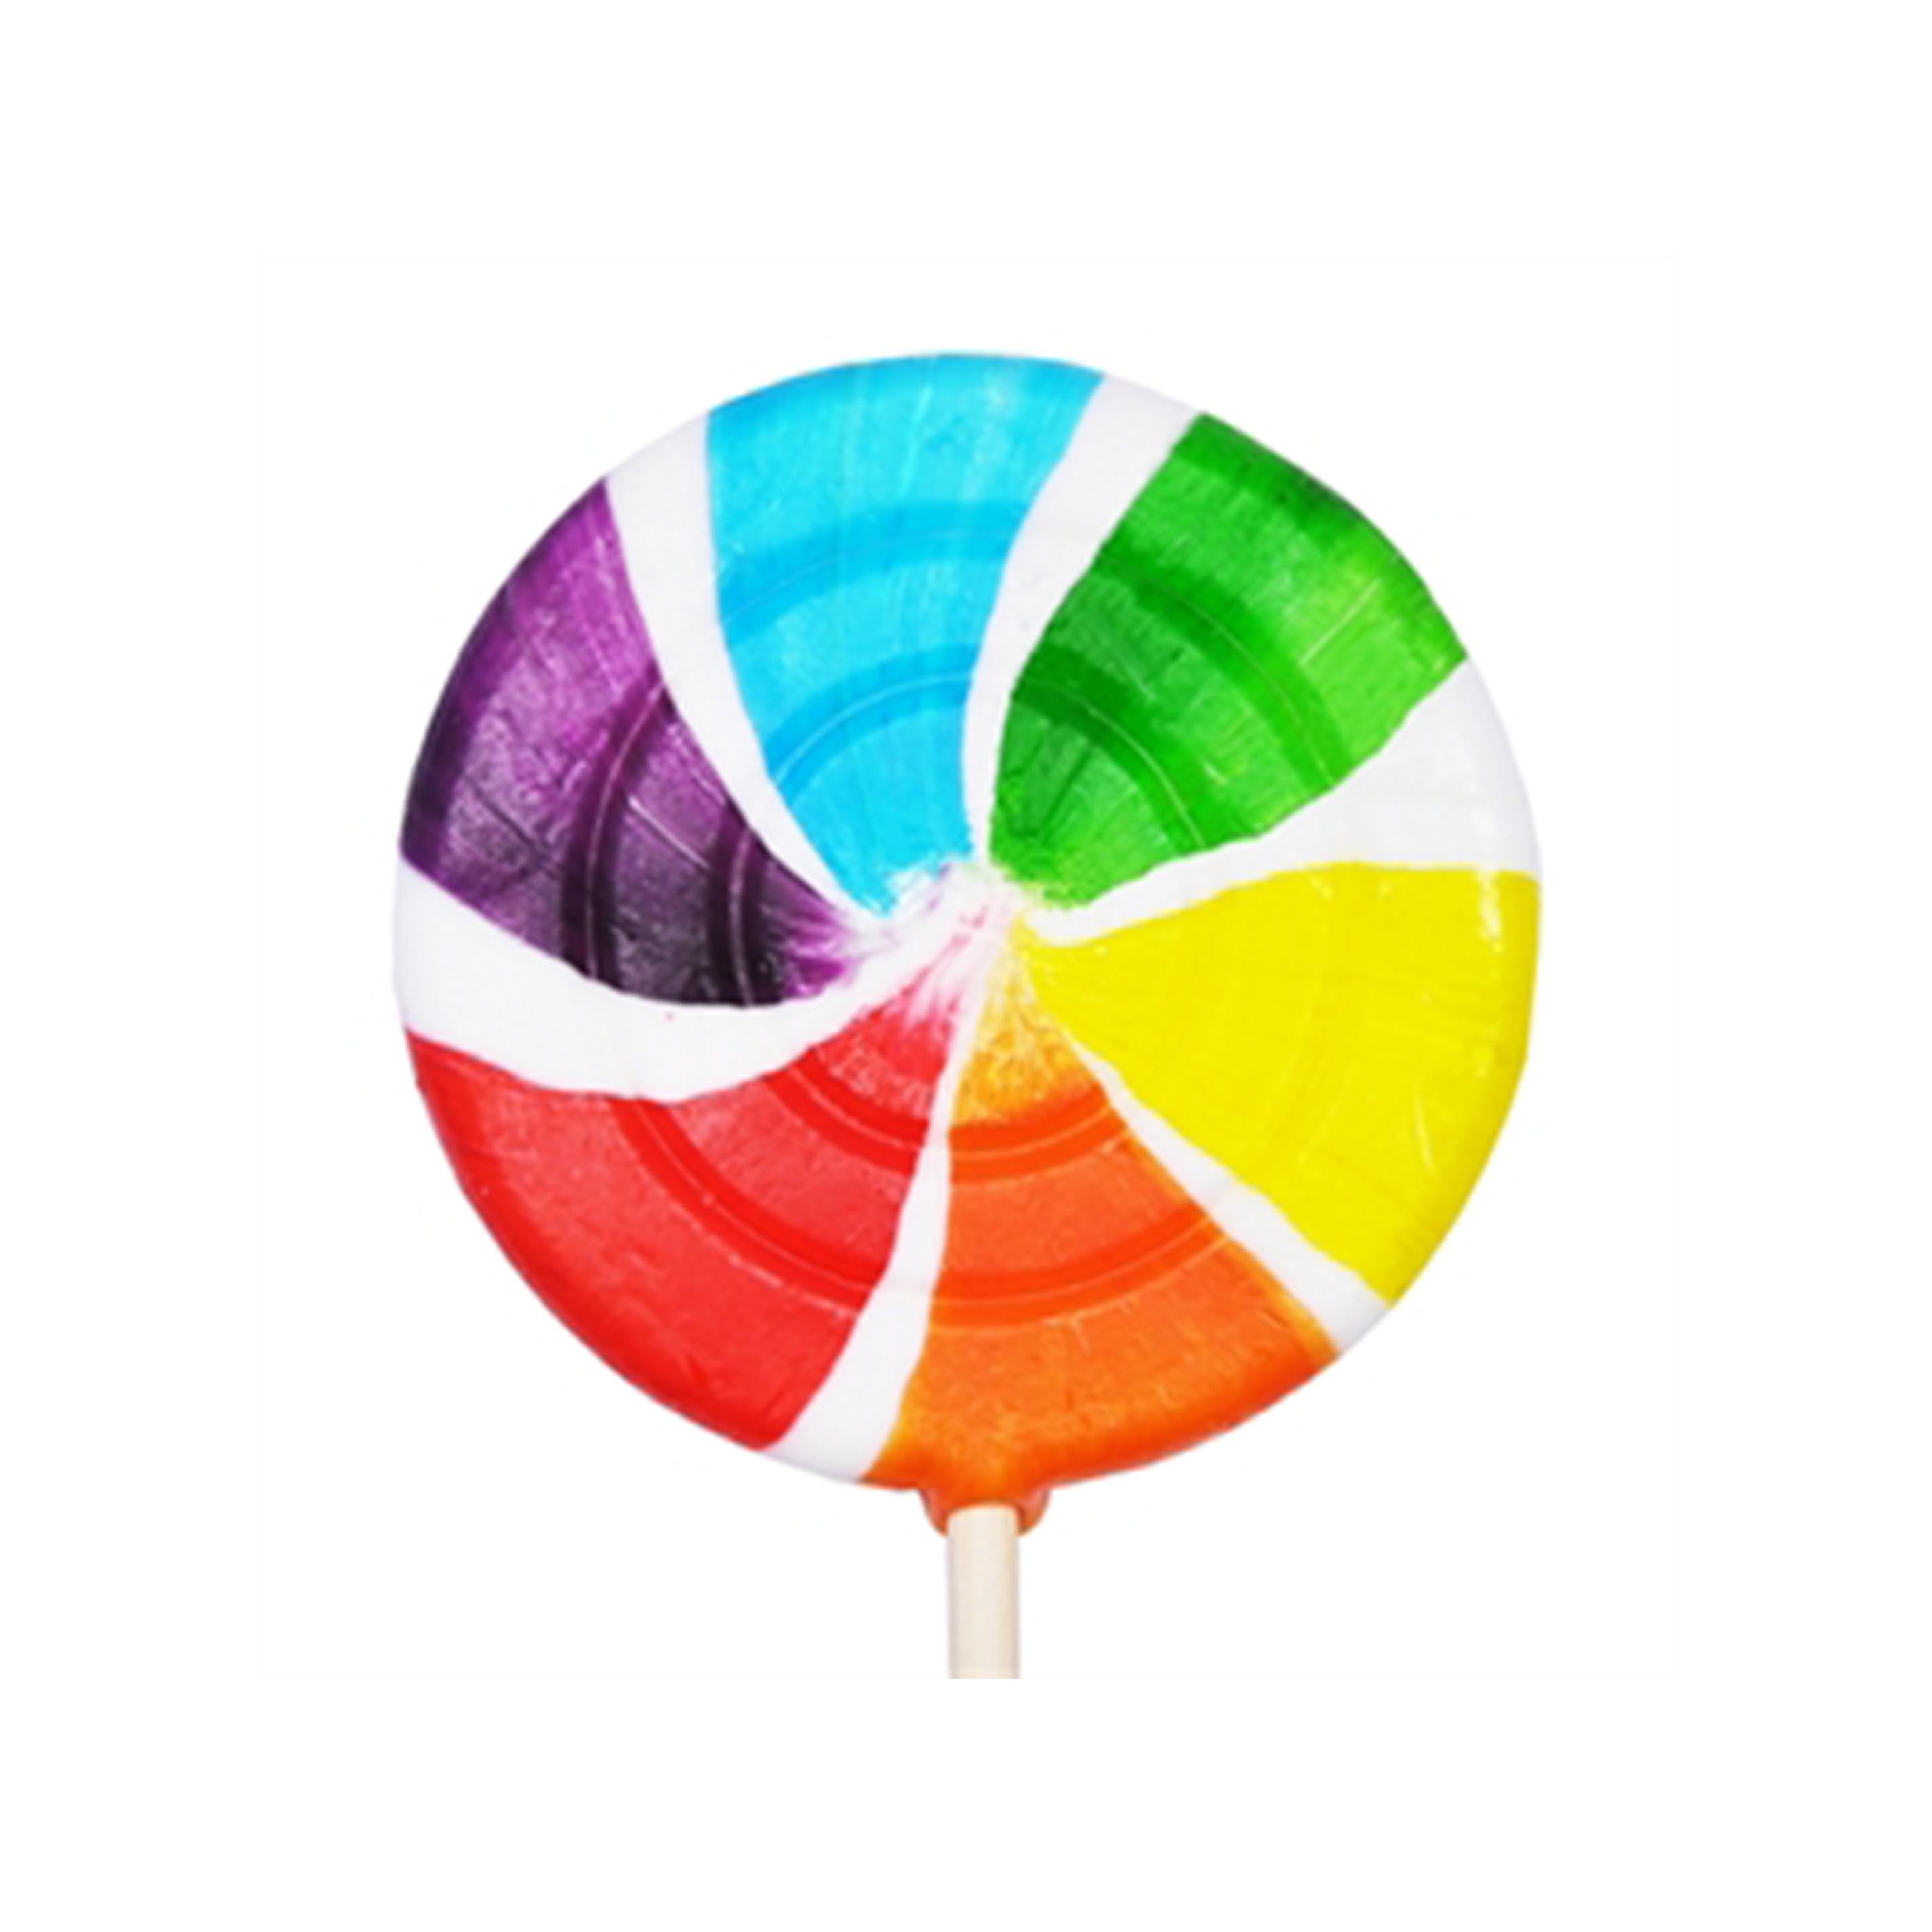 rainbow colored wheel, strawberry flavored sweet whirls lollipop candy